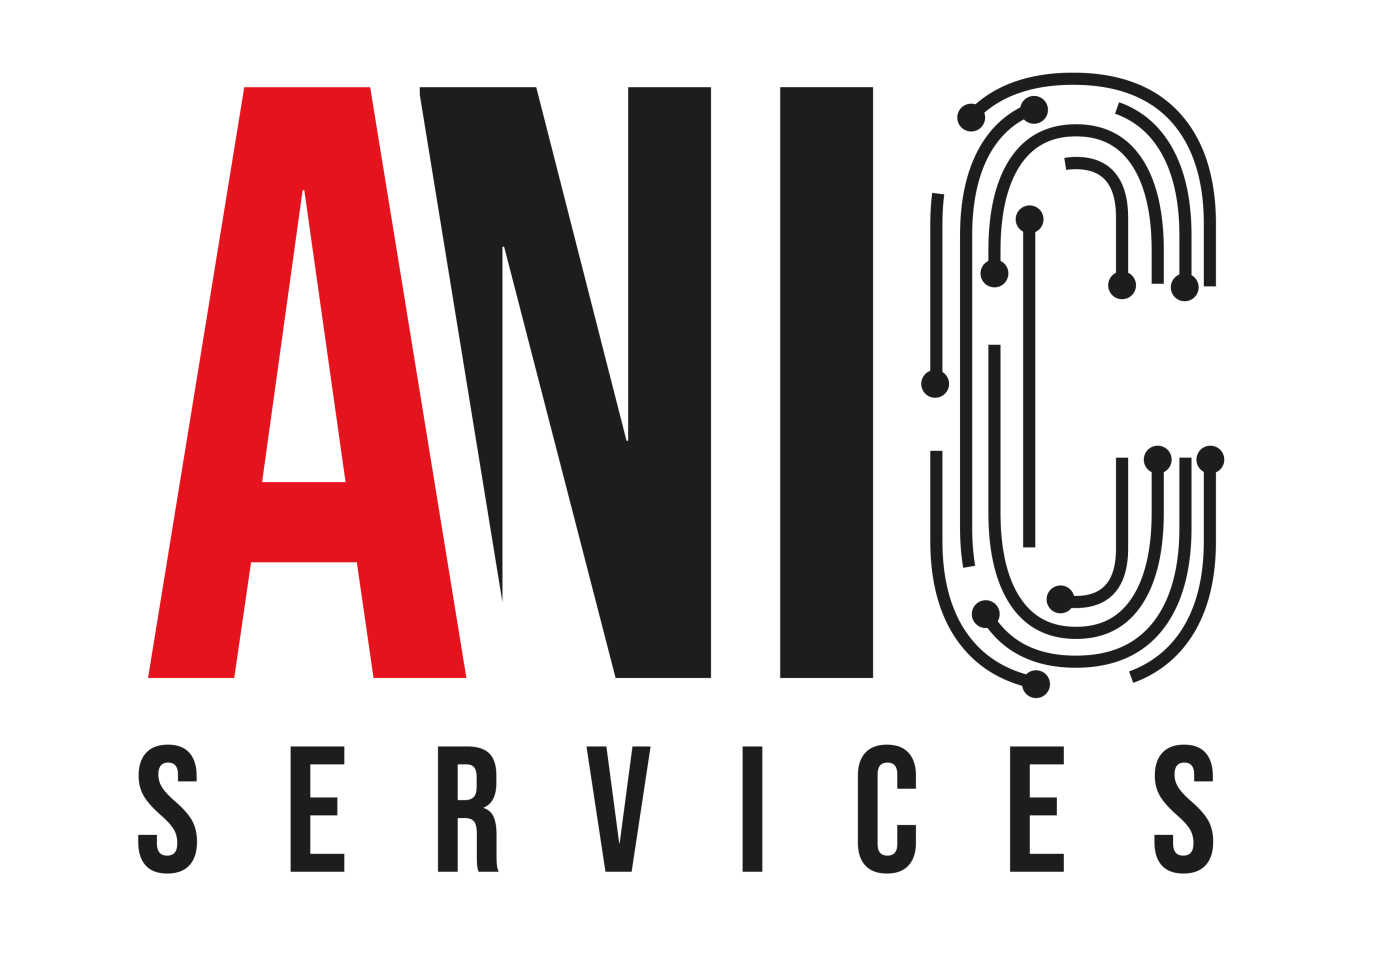 anic services